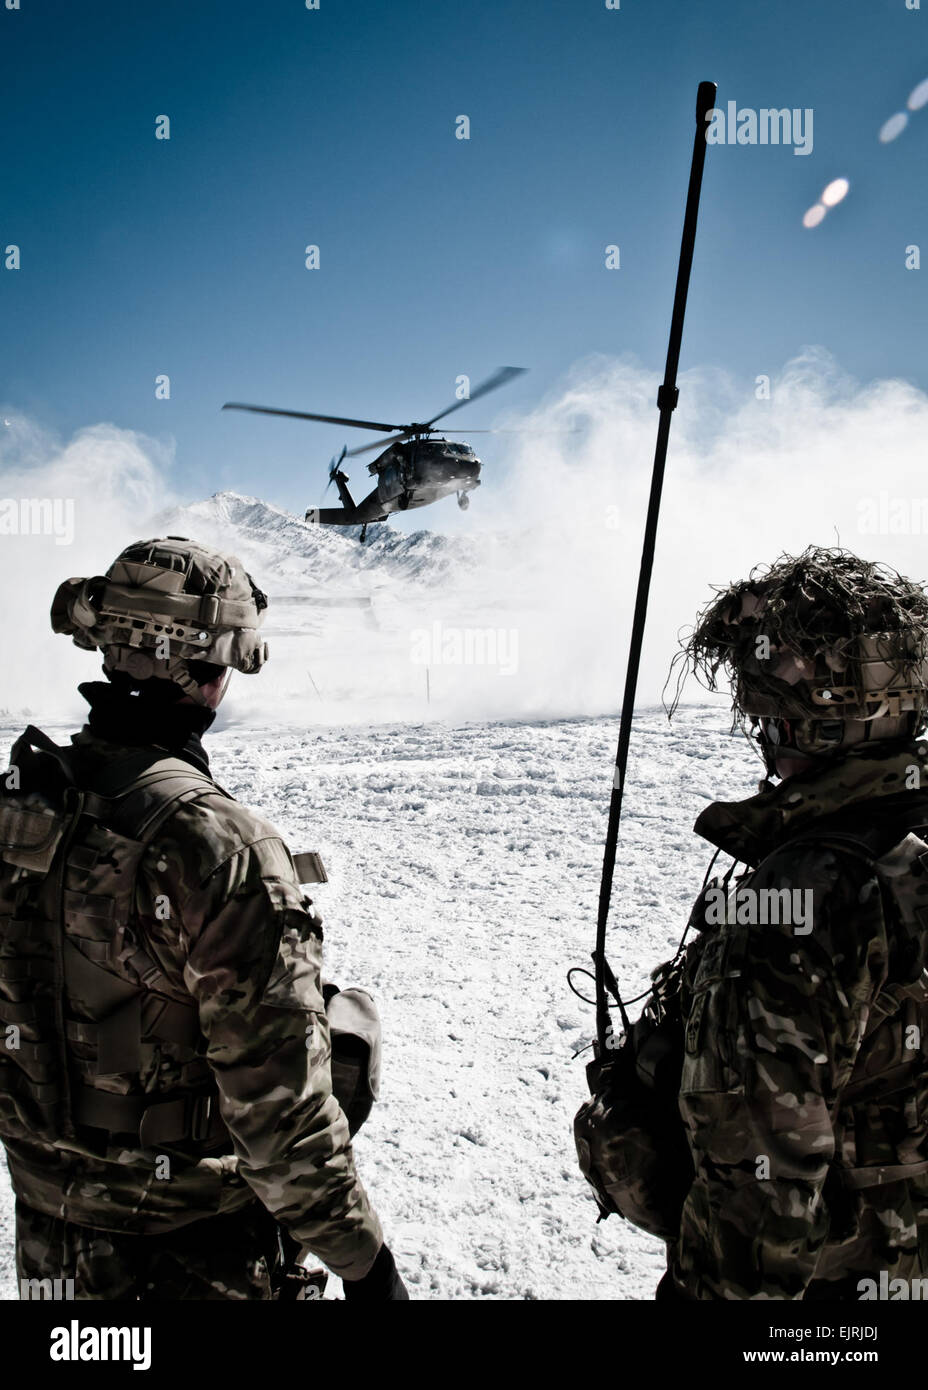 U.S. Army Staff Sgts. Neil Nunez and Justin Puchalsky, from Company A, 2nd Battalion, 28th Infantry Regiment, Task Force 3-66, watch the arrival of a helicopter at their remote combat outpost in Marzak. Marzak has been a haven for insurgent fighters over the past decade. A new police checkpoint is being constructed through the winter in Marzak to disrupt the movement of insurgent forces through the area, located just 6 km from the site of the Battle of Takur Ghar. Stock Photo